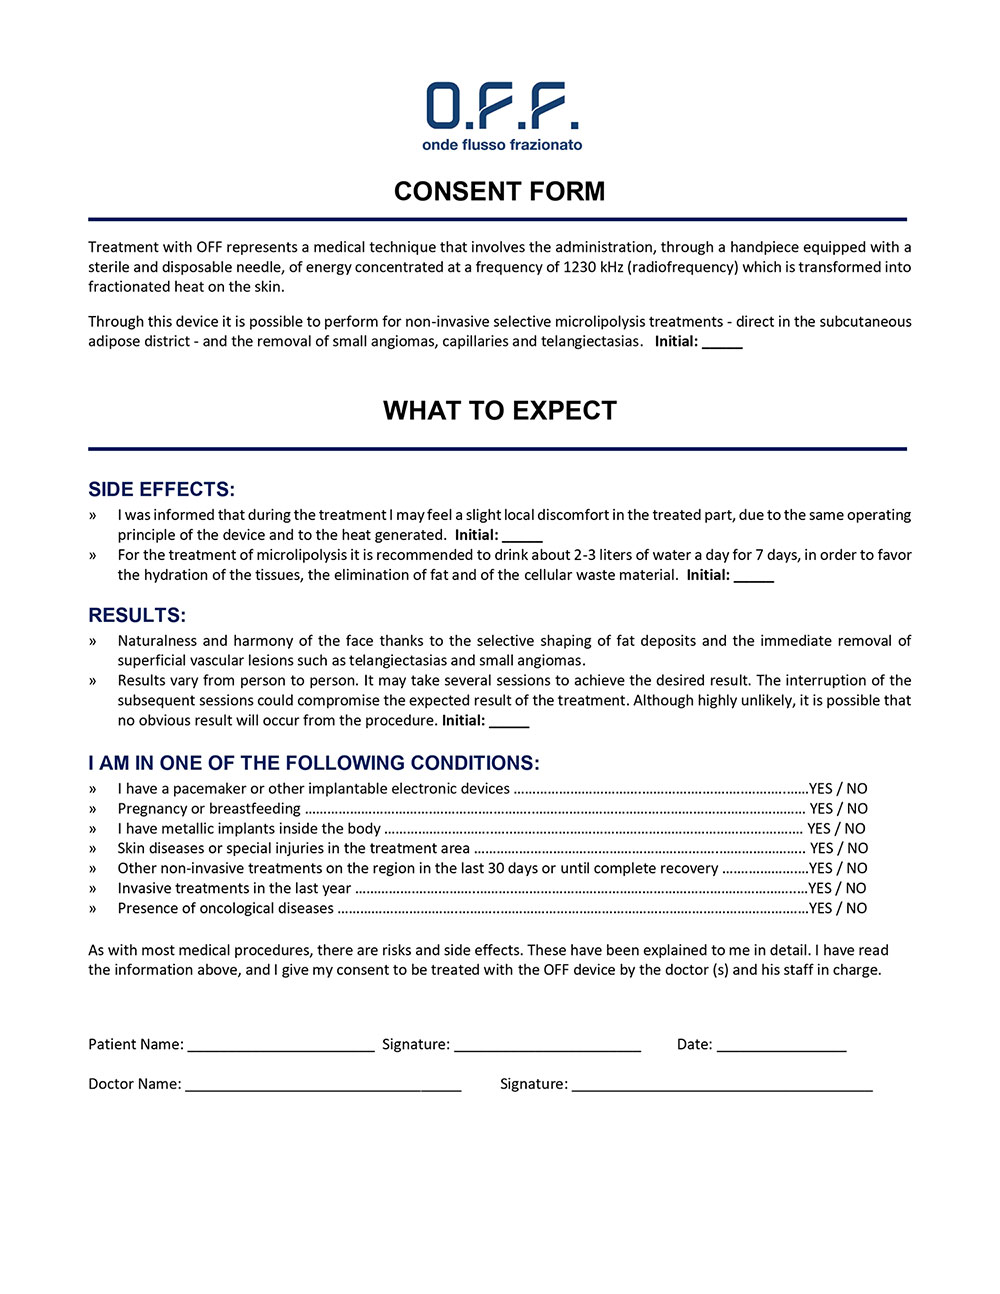 Consent Form OFF showing the concept of Patient Forms